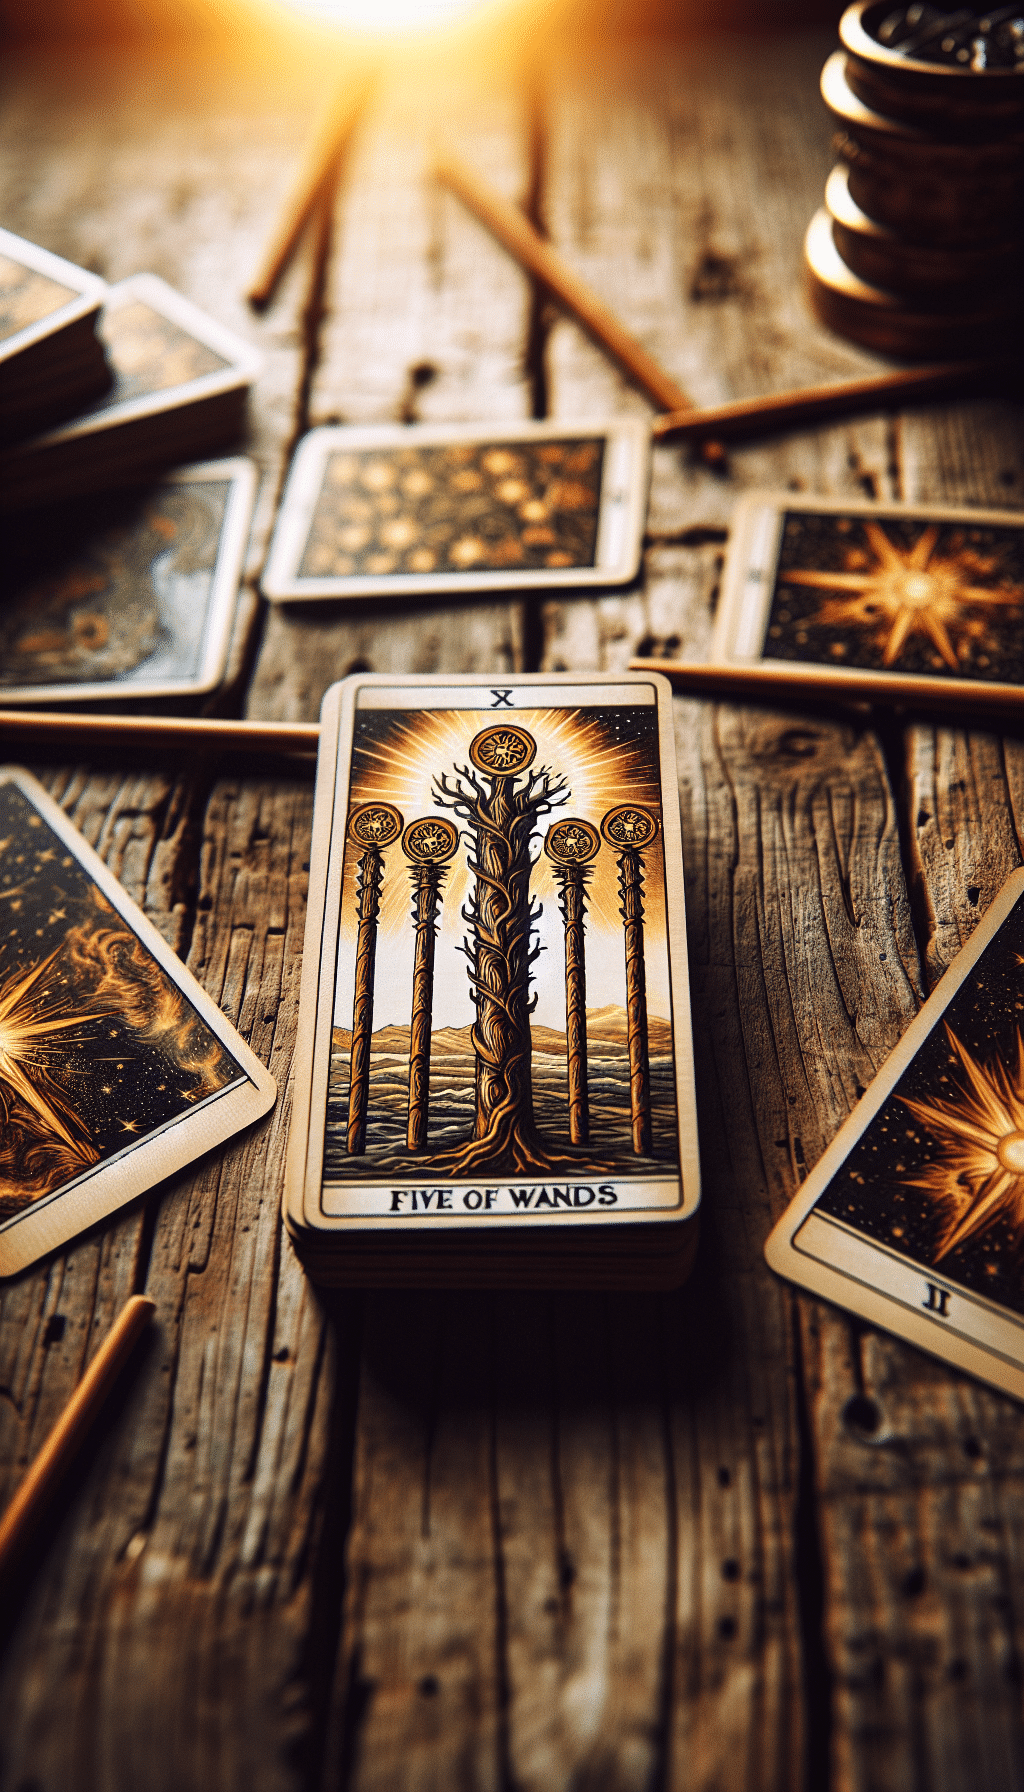 Embracing Conflict: The Personal Growth Journey of the Five of Wands